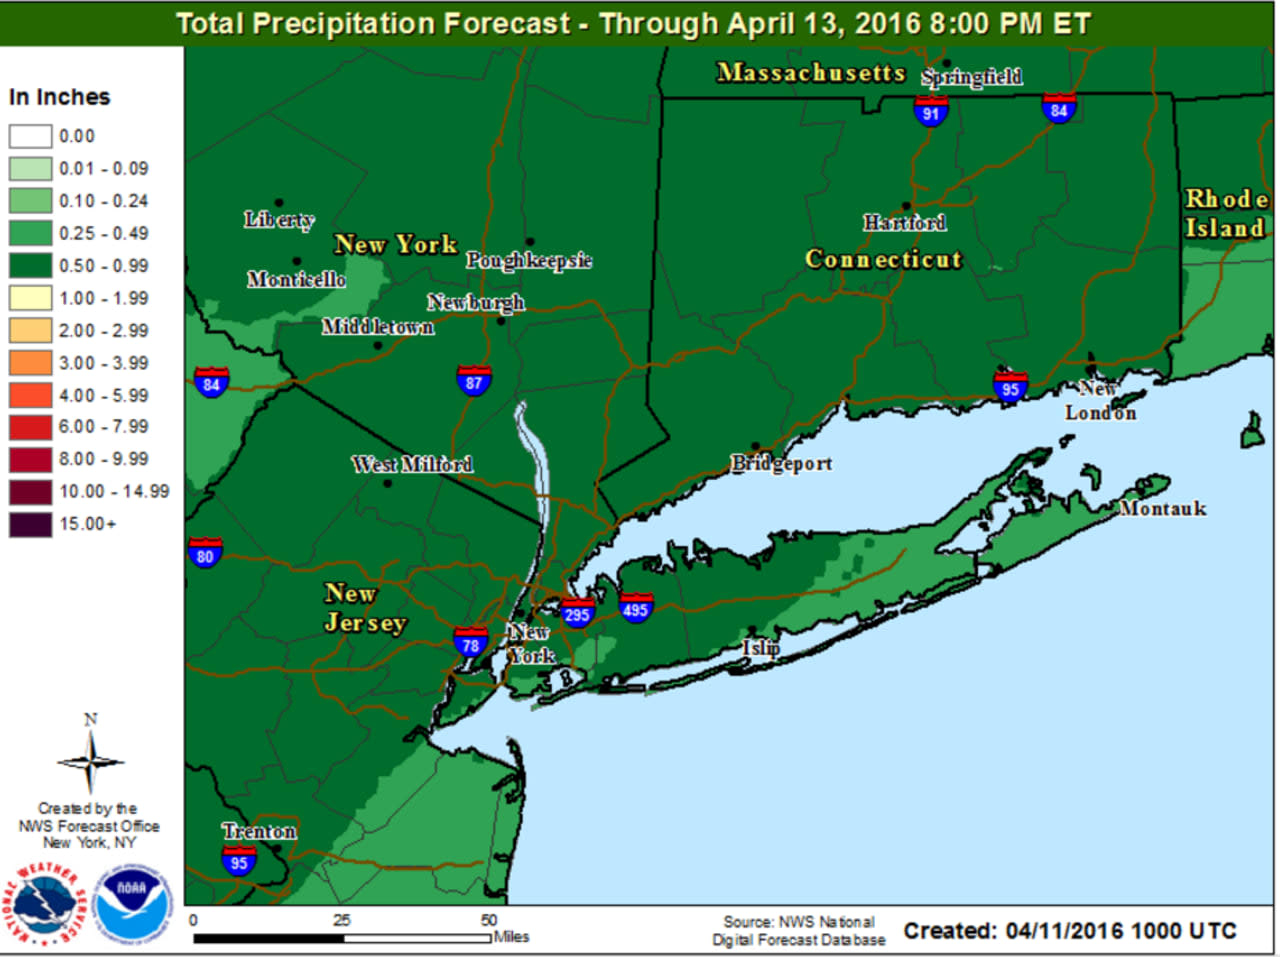 A look at rainfall projections through early Wednesday.